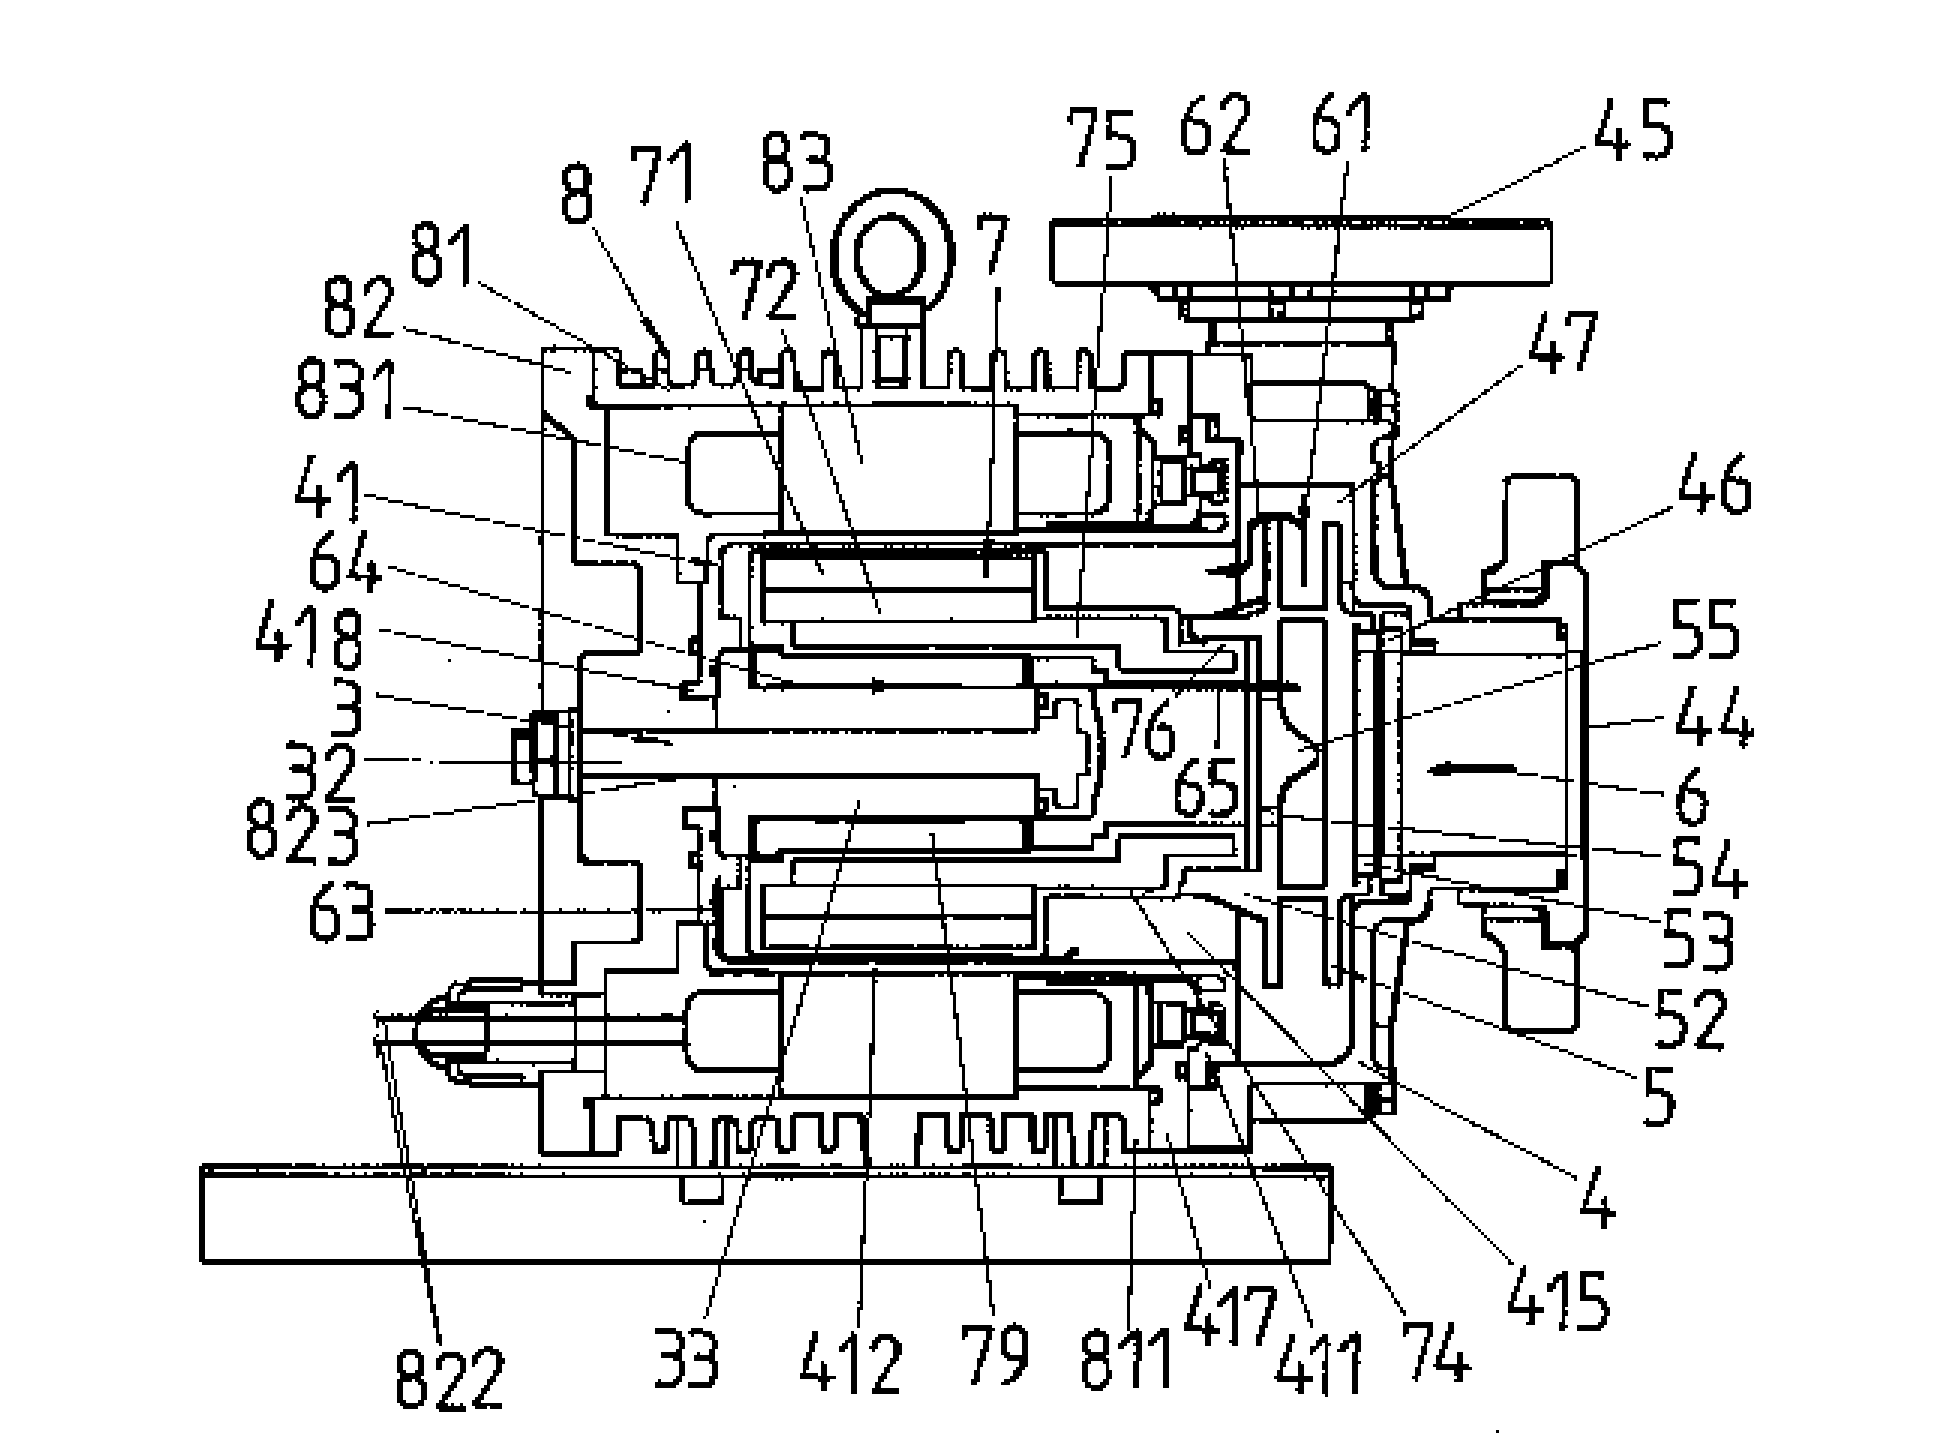 Structural improvement of a canned motor pump